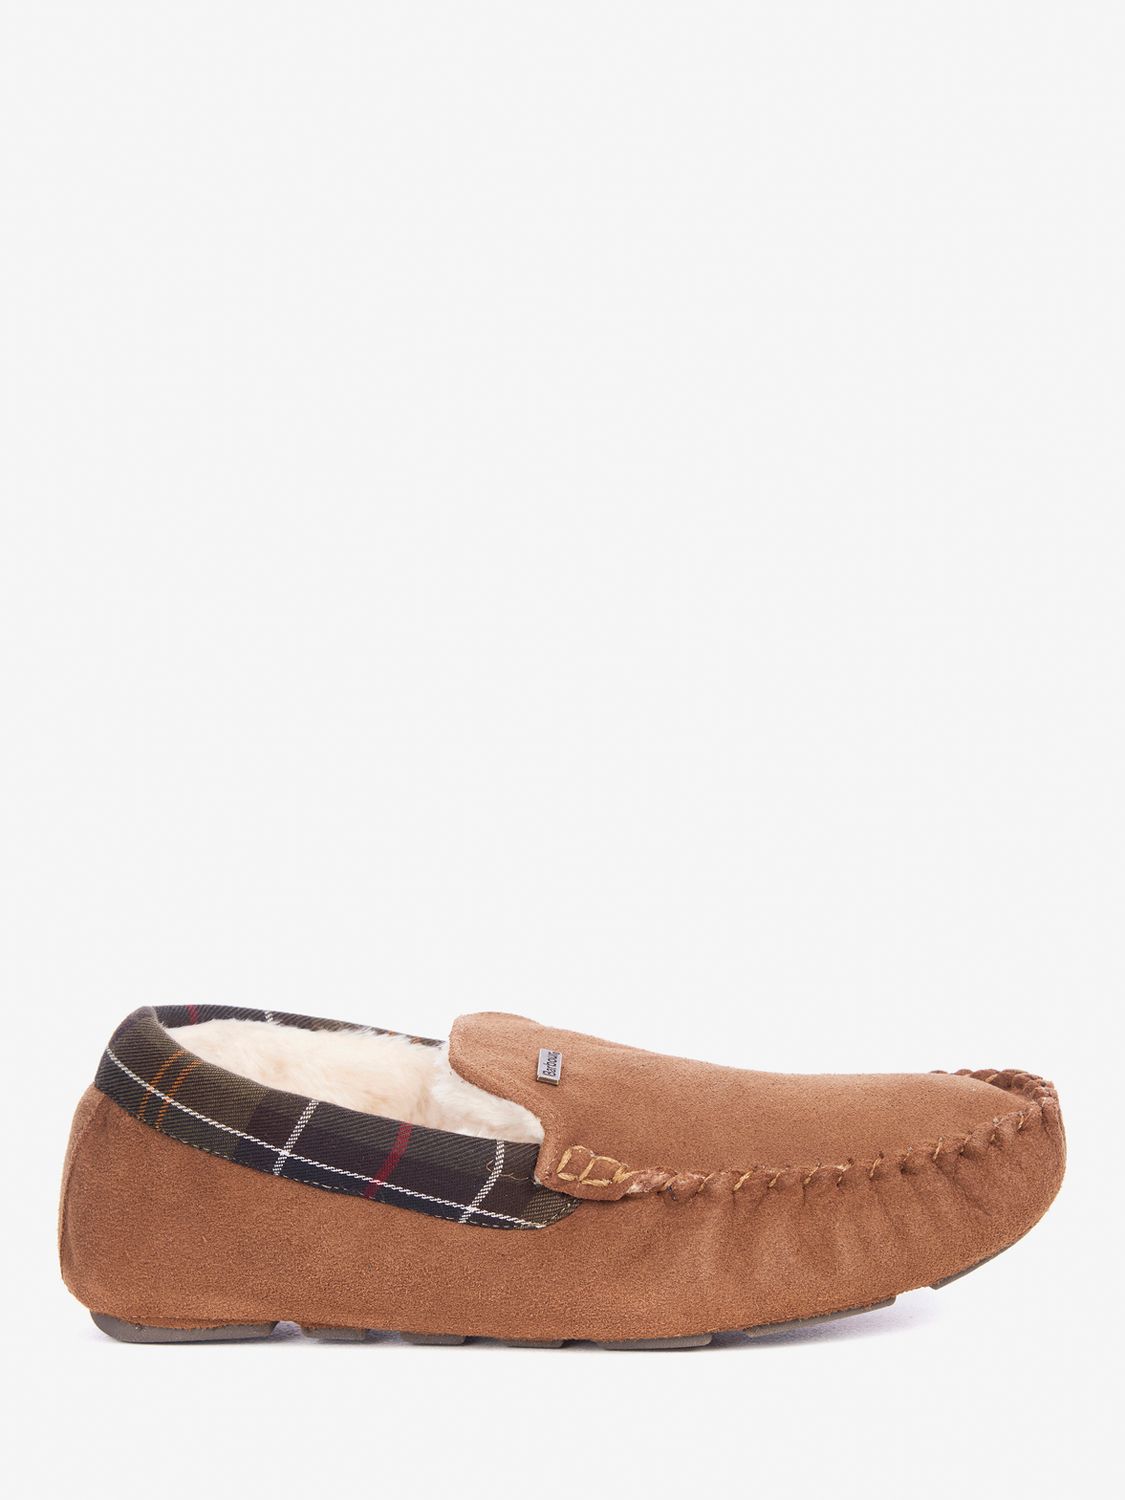 barbour monty slippers